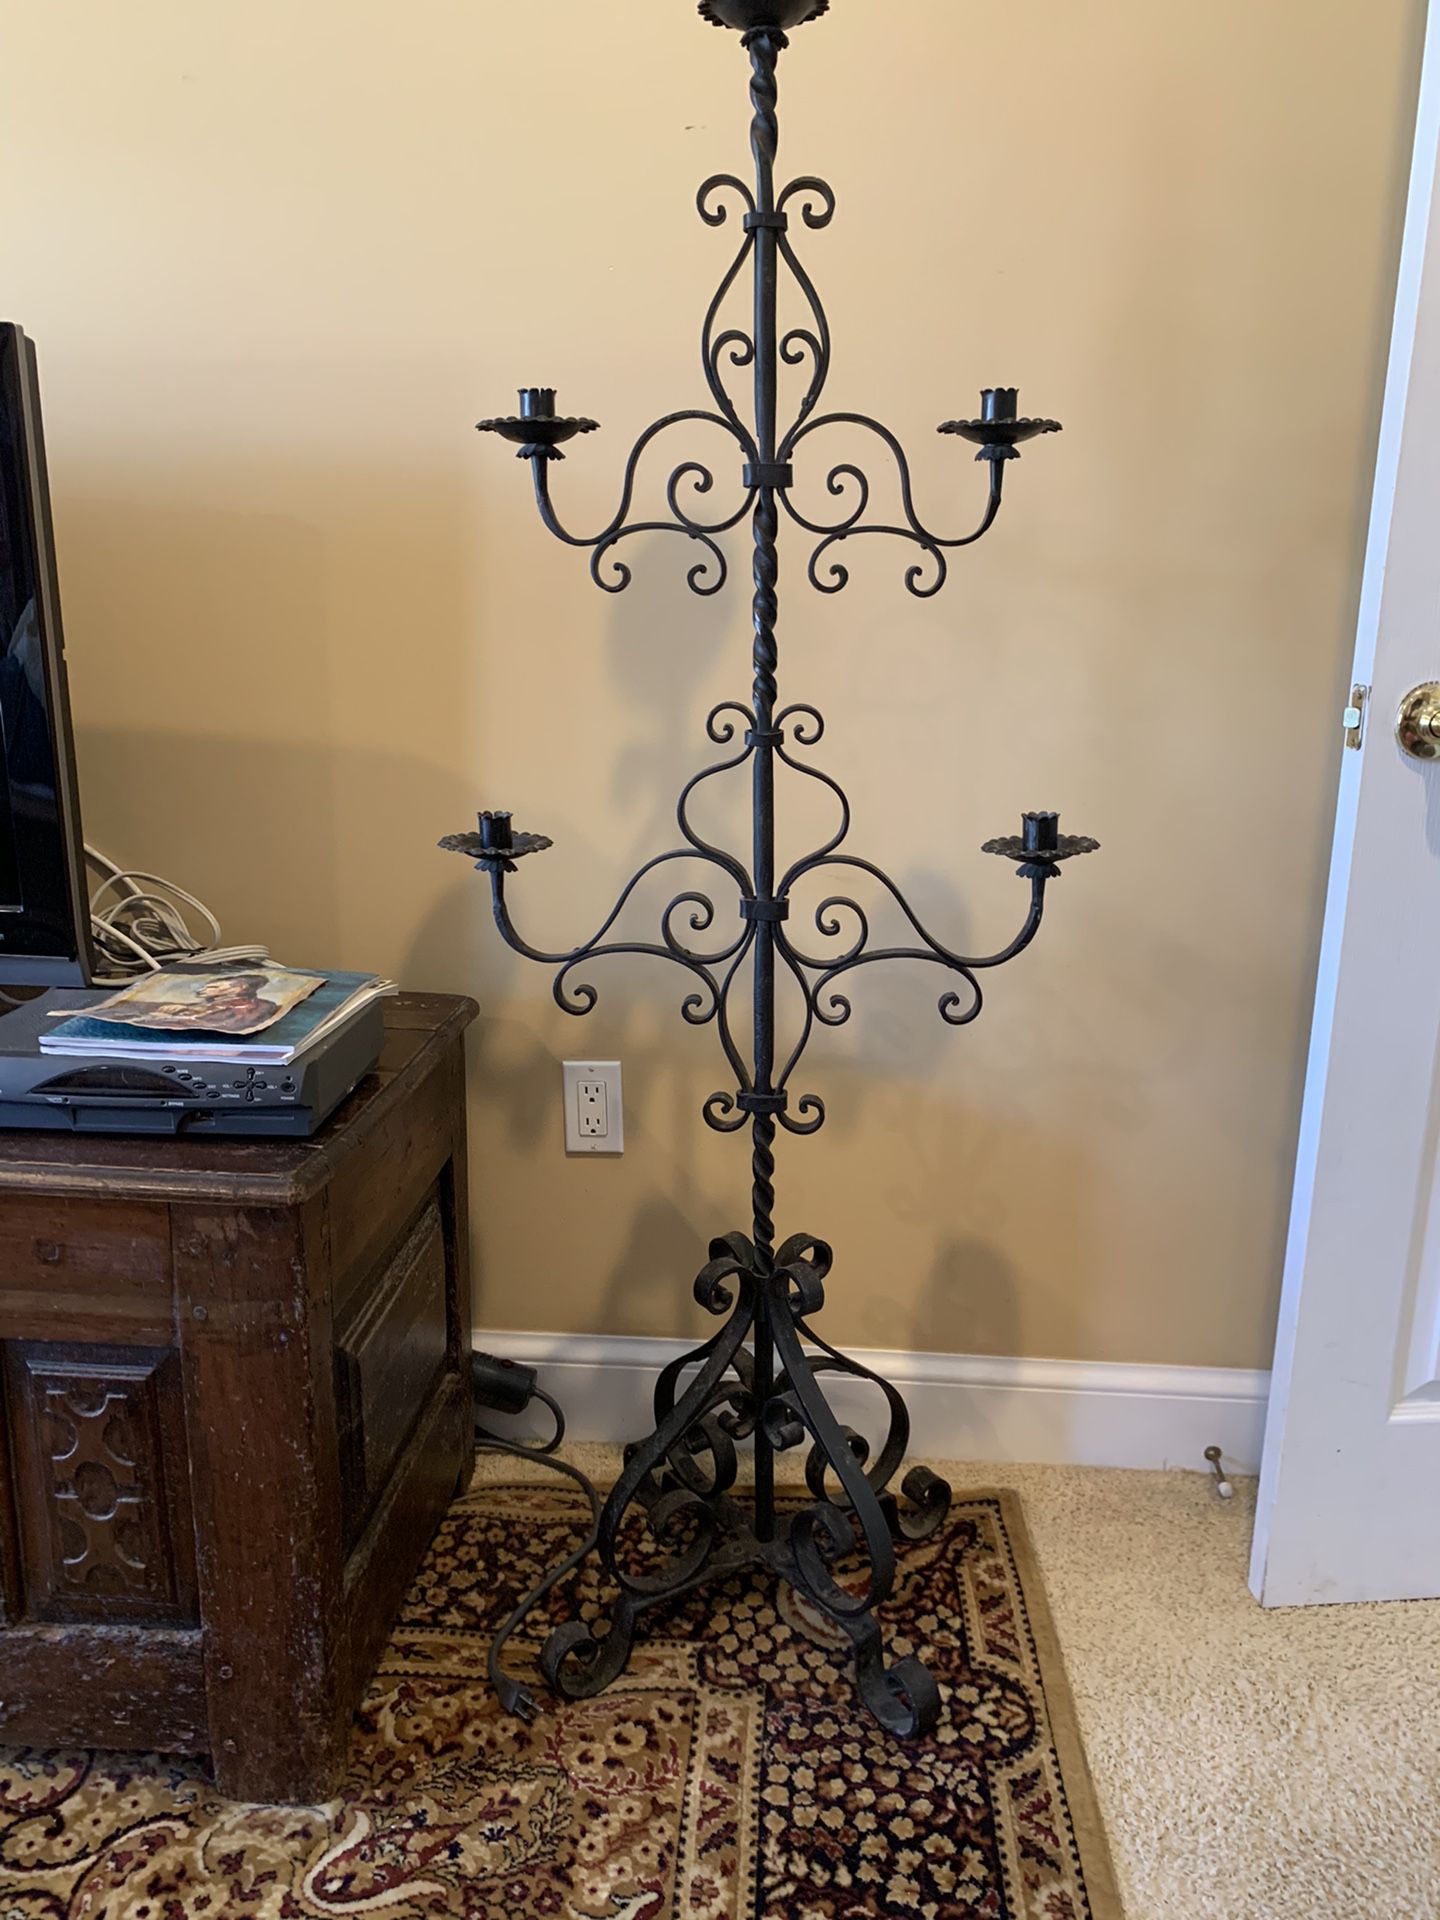 Antique Spanish Candelabra, Wrought Iron, Restoration Hardware style. Mint condition, beautiful. Four feet tall.